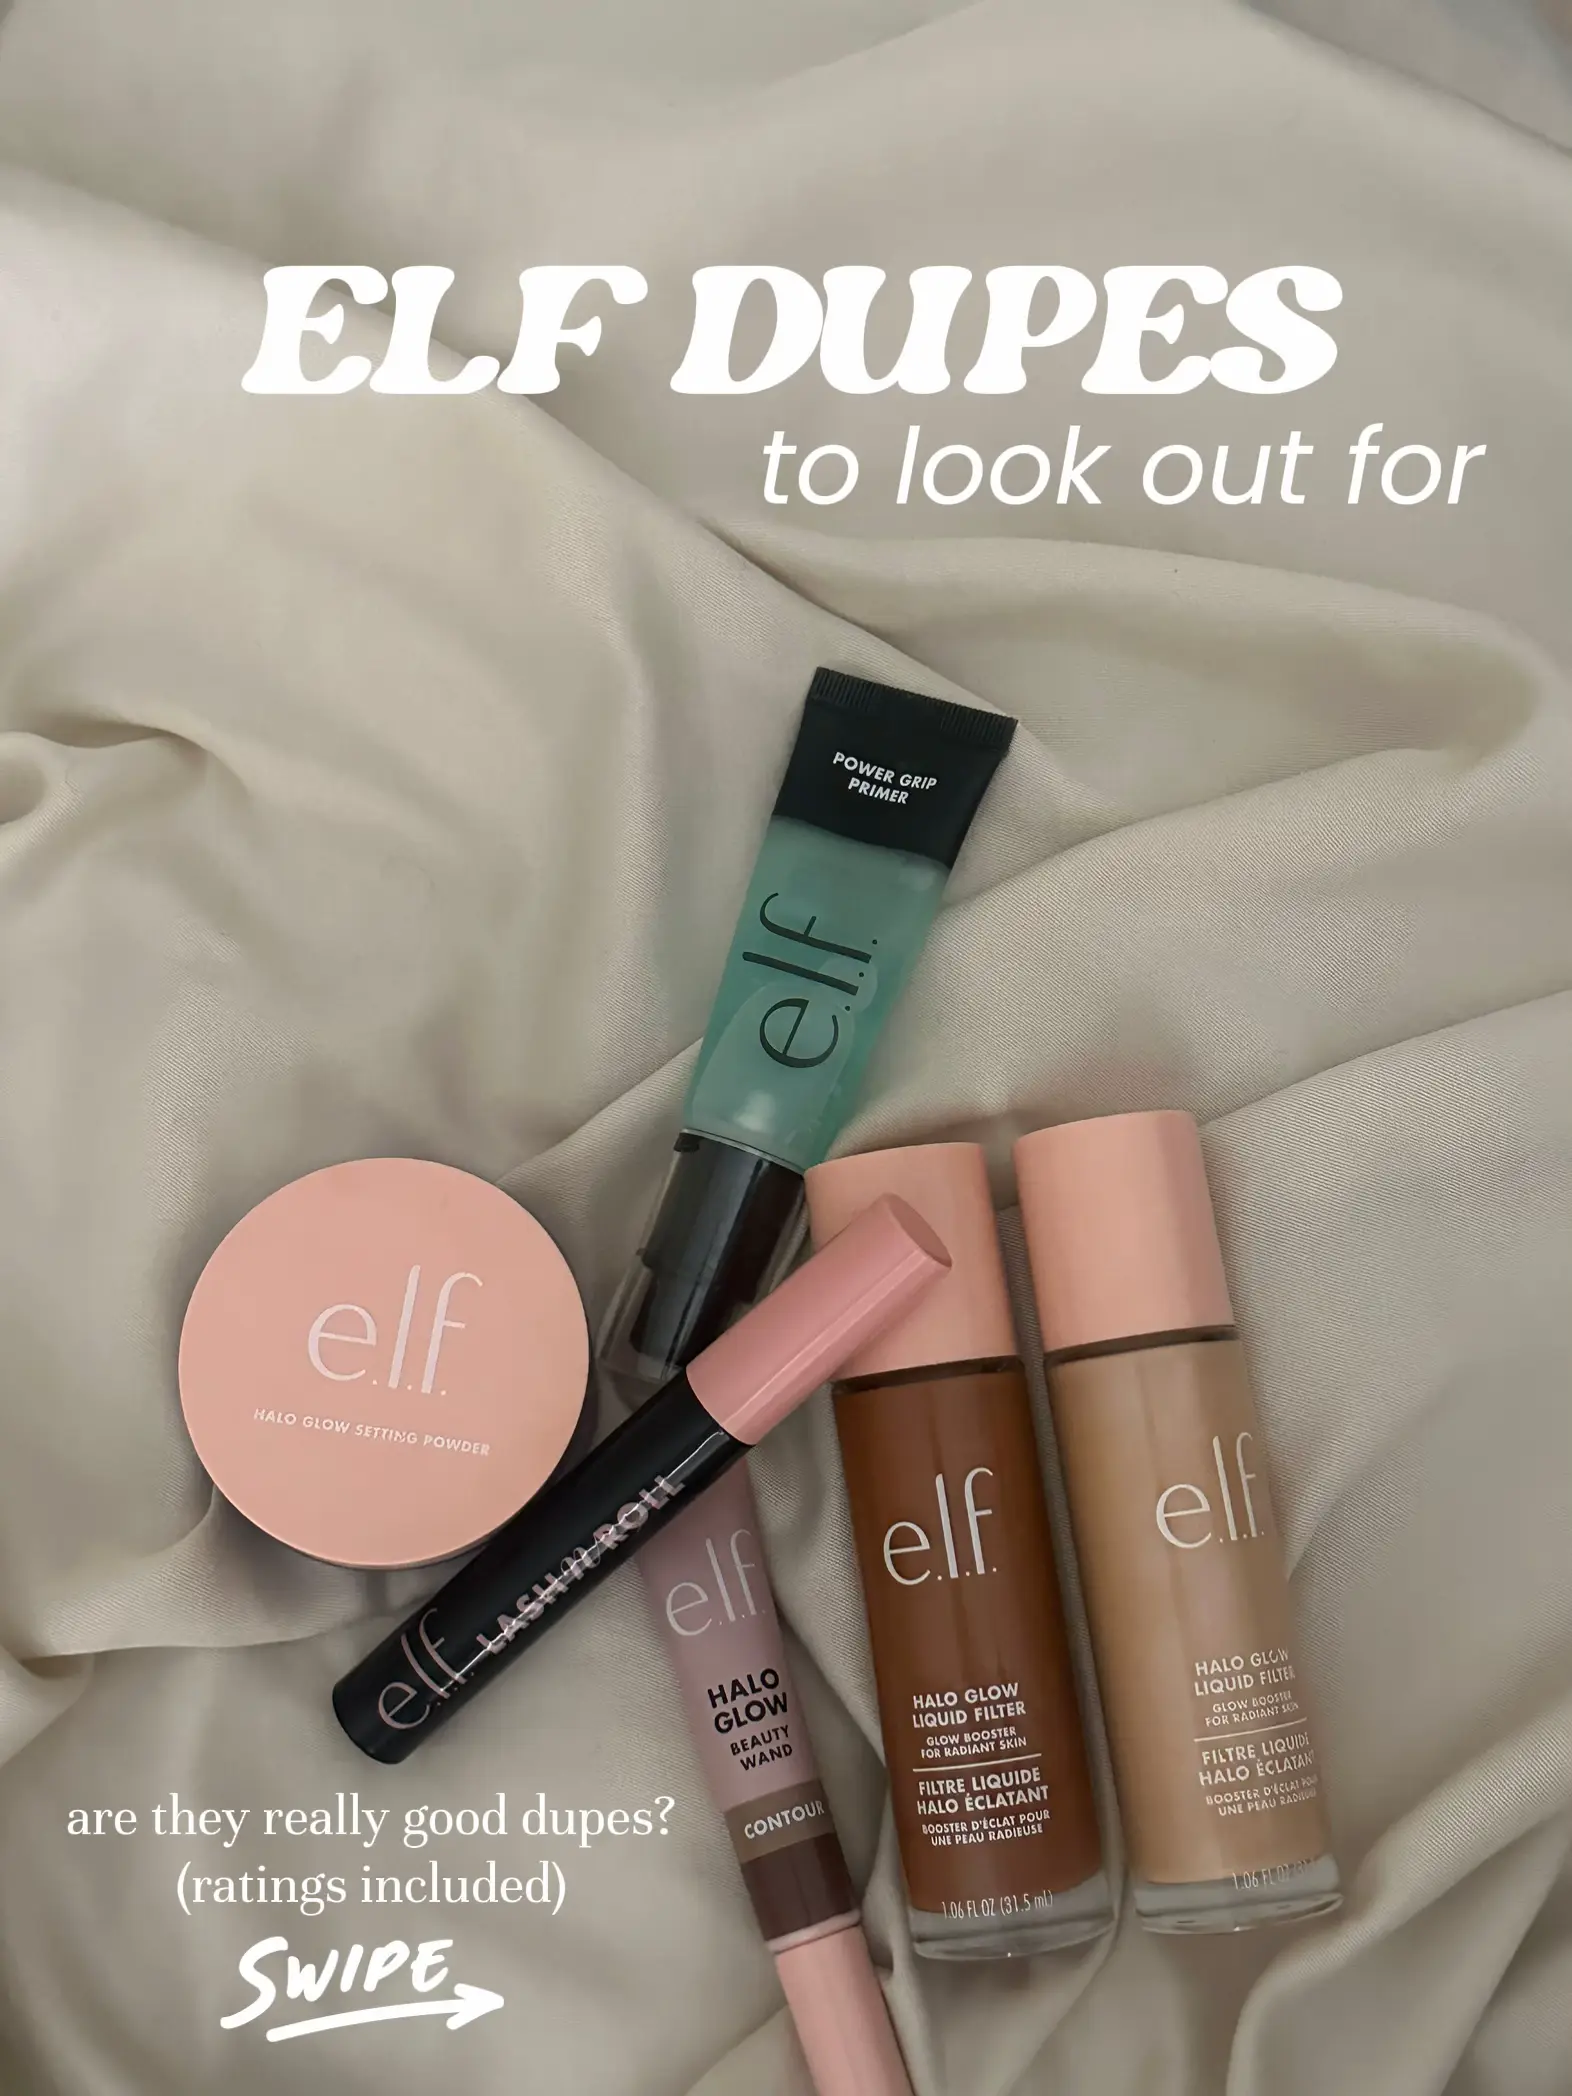 I'm a make-up guru and e.l.f is seriously underrated - seven products you  should buy including a bargain concealer